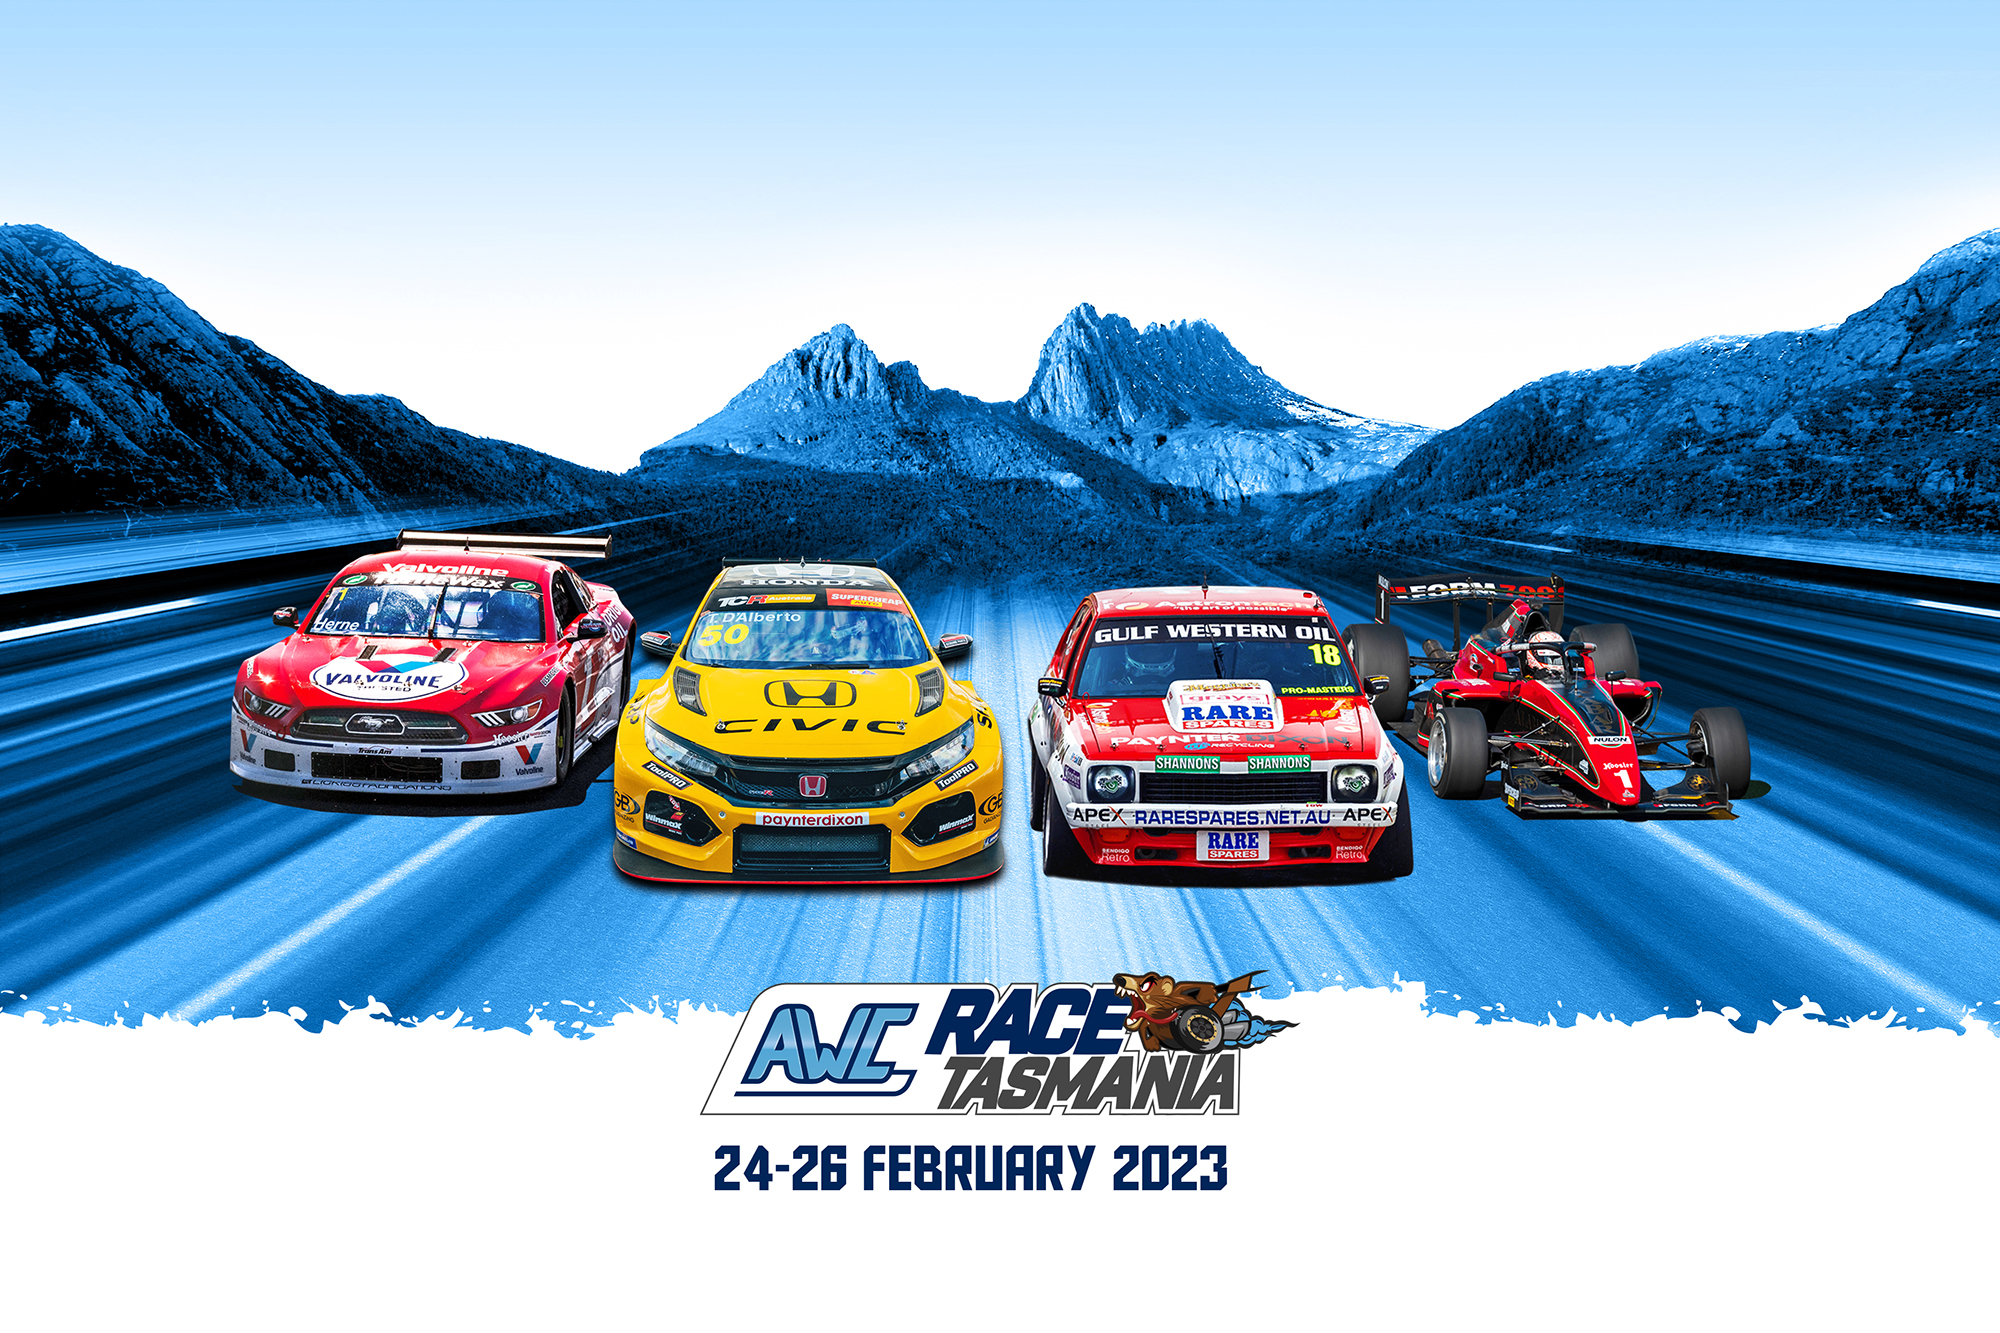 Tickets on sale for the third edition of AWC Race Tasmania